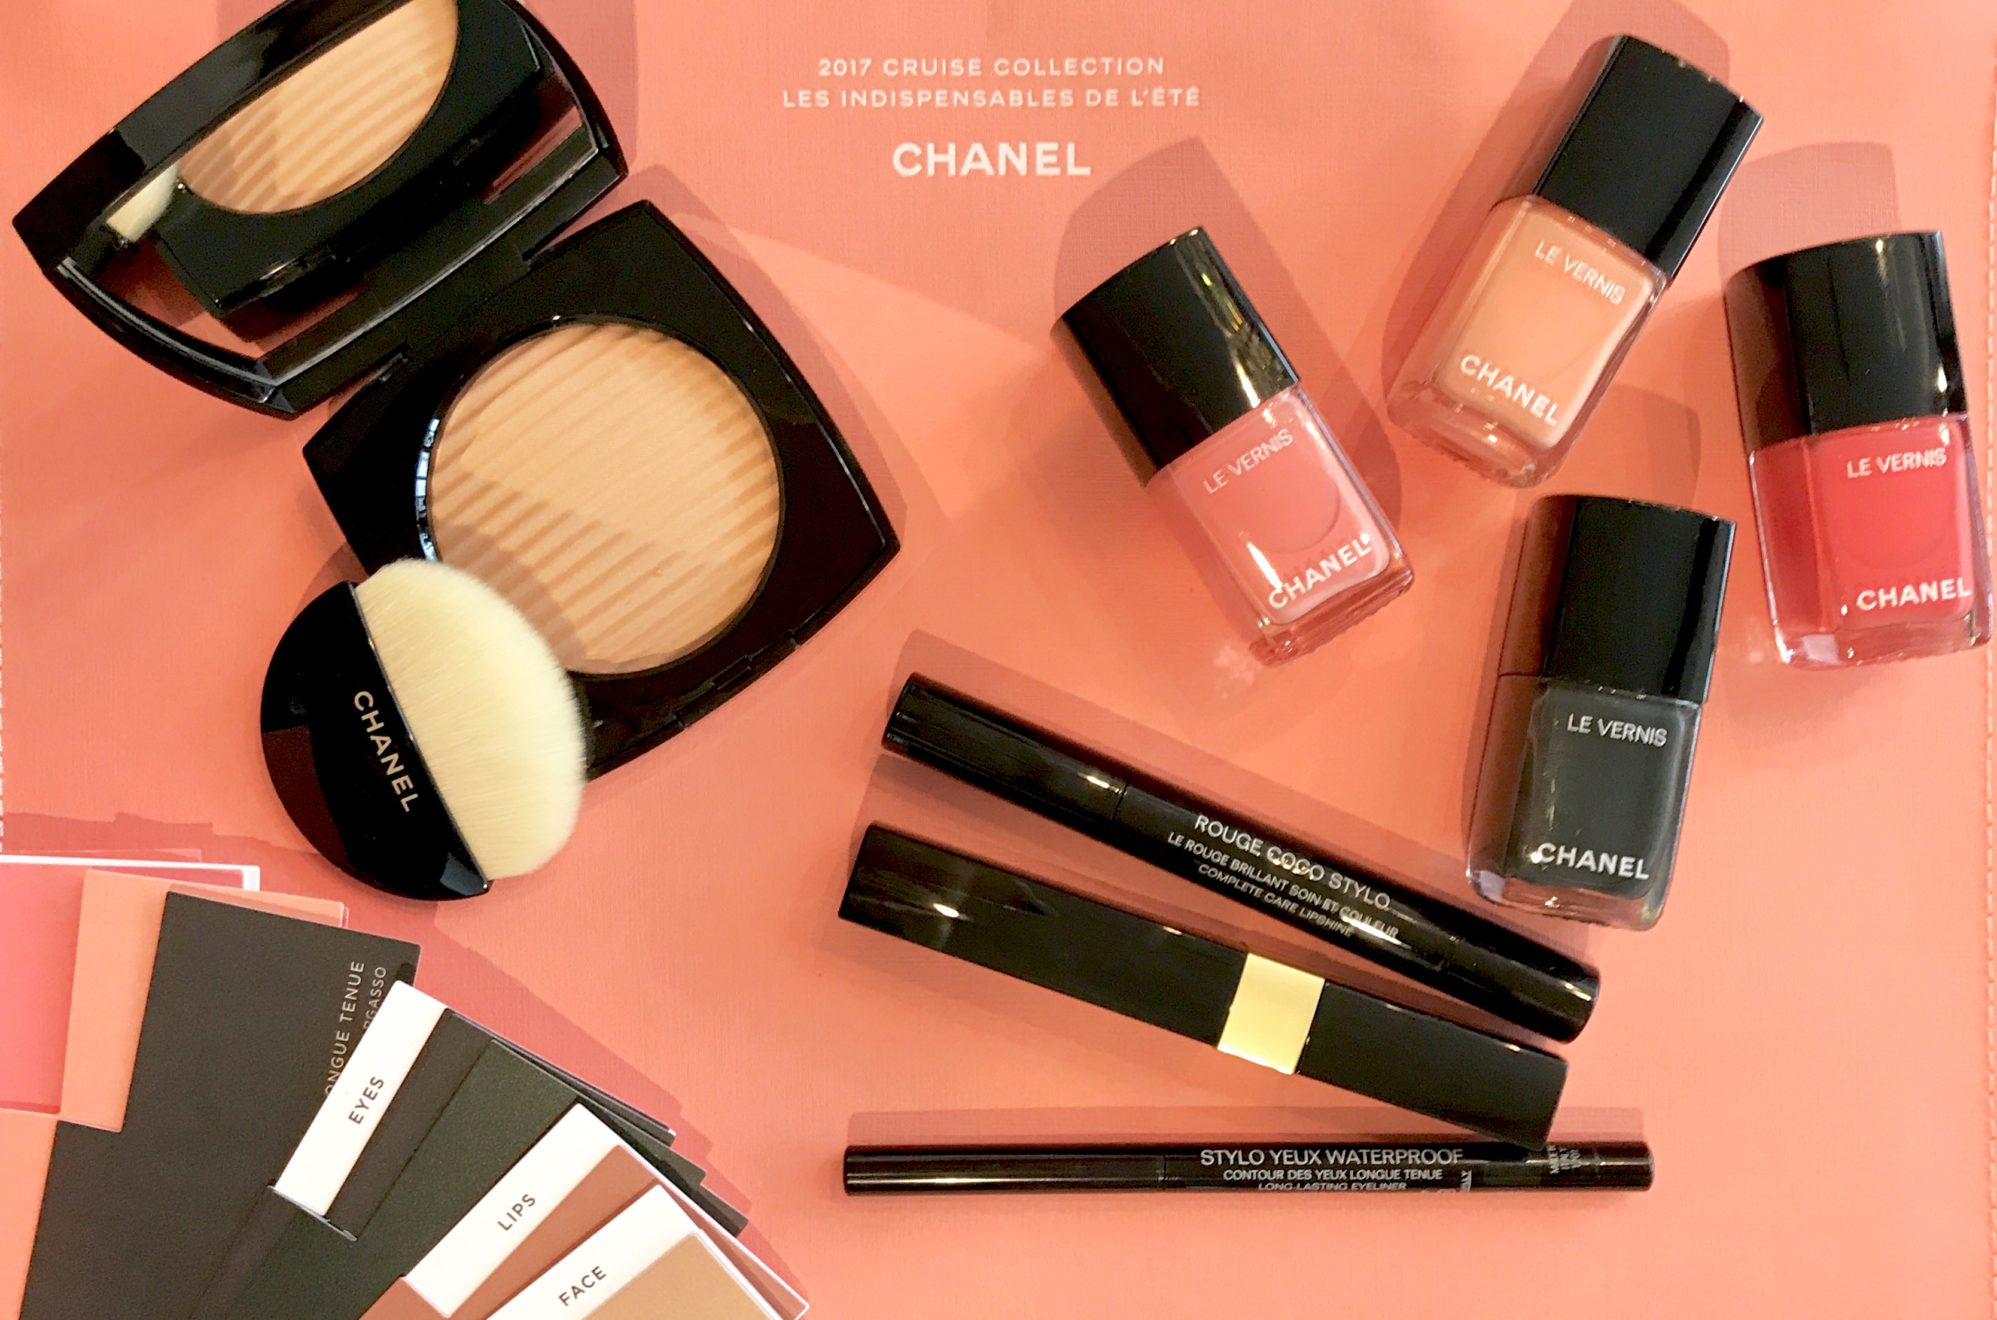 CHANEL CRUISE COLLECTION 2017: review and swatches